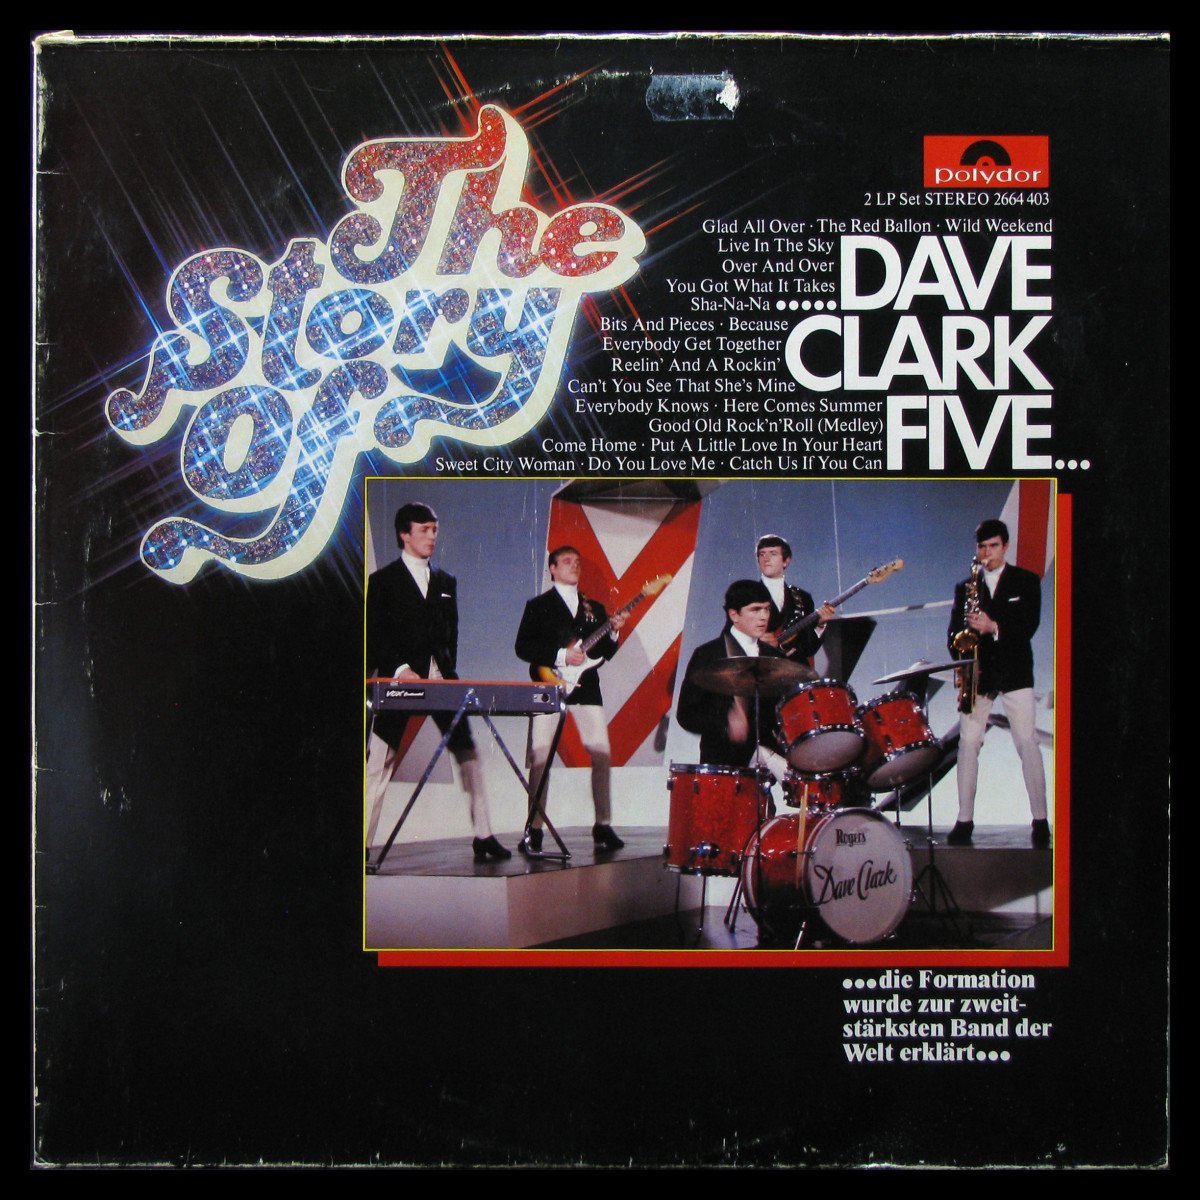 Story Of Dave Clark Five